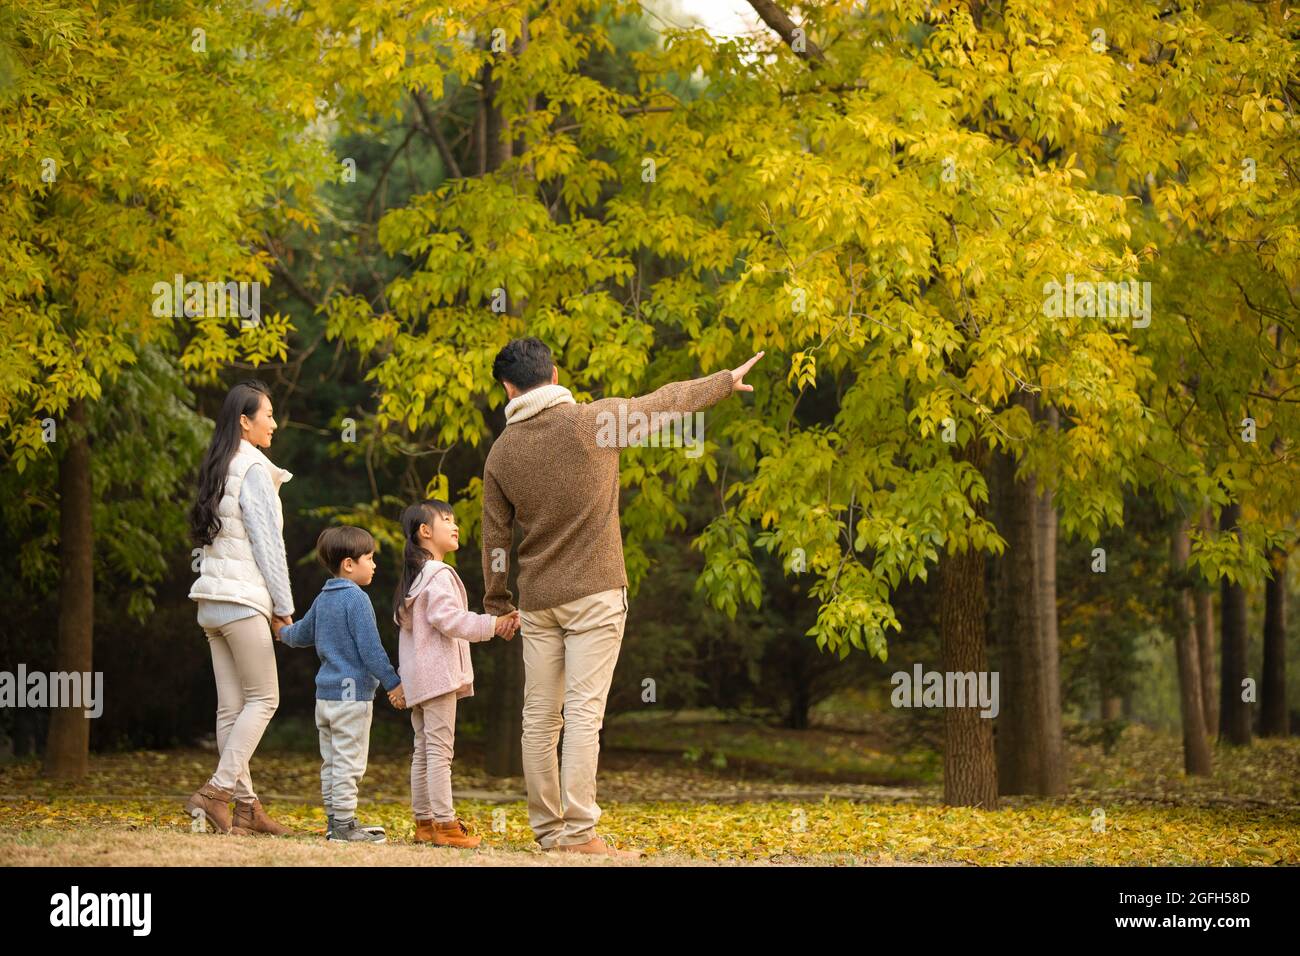 Happy young family having fun in woods Stock Photo